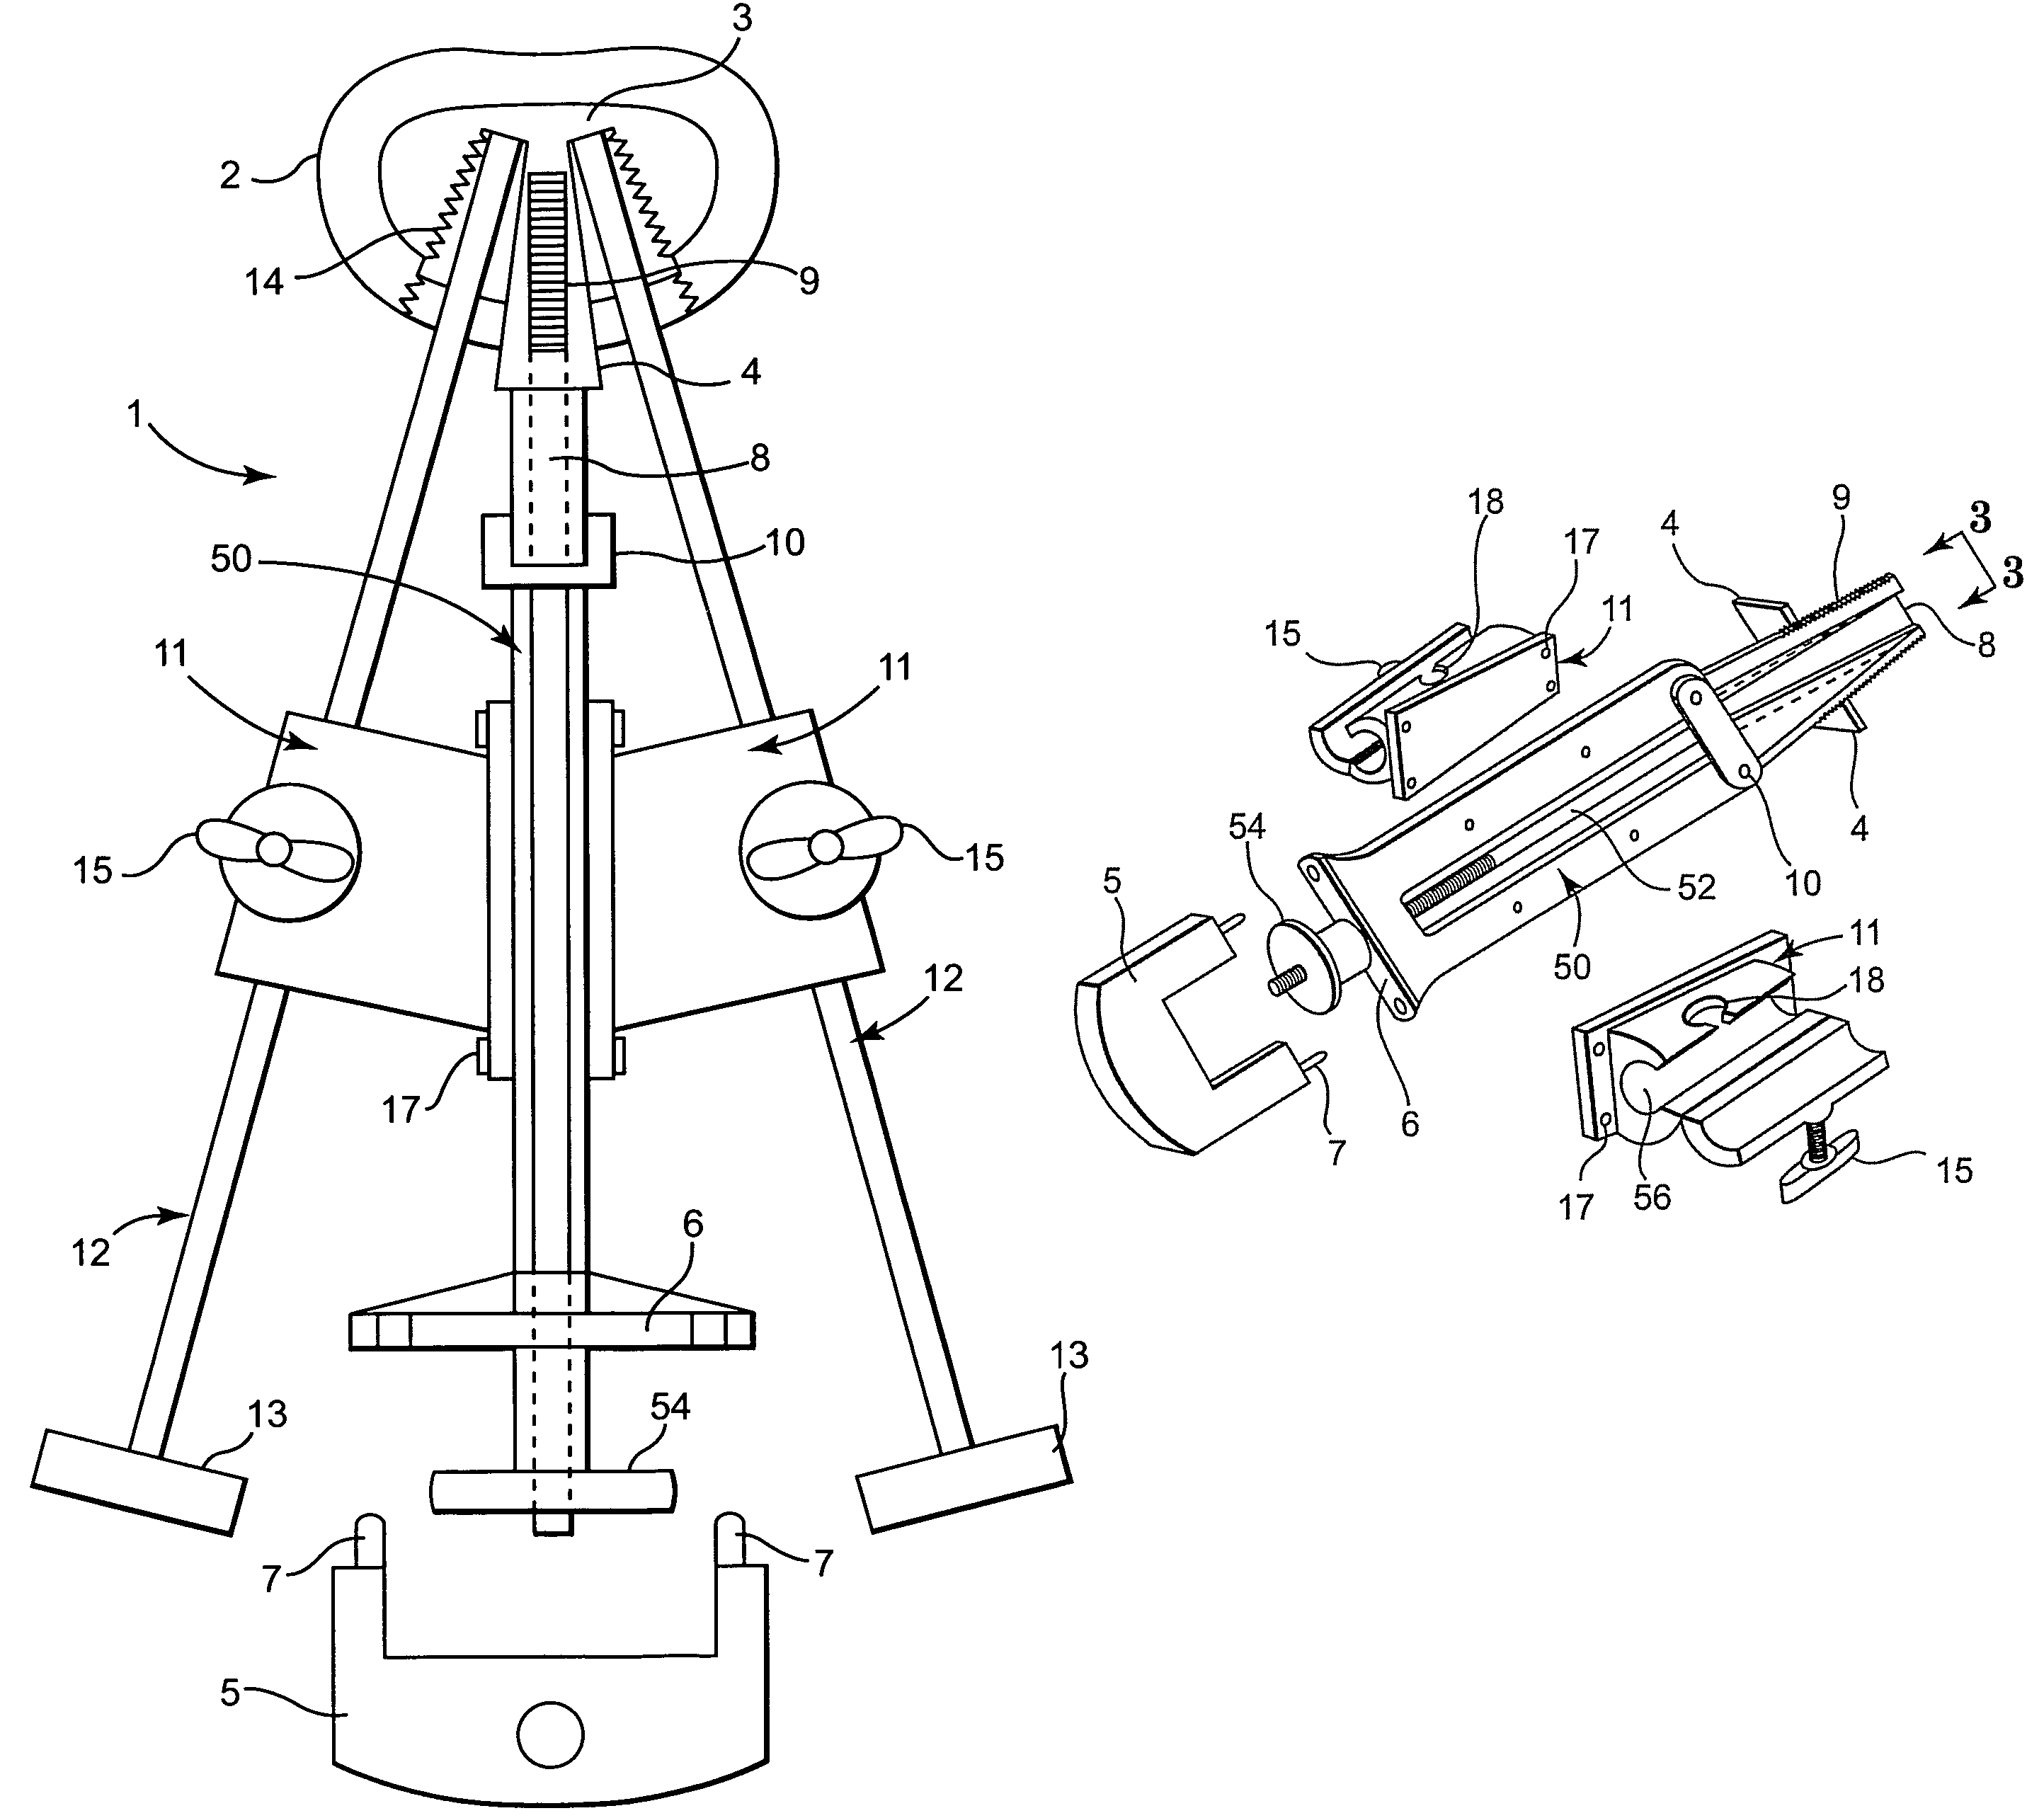 Tapered bone fusion cages or blocks, implantation means and method